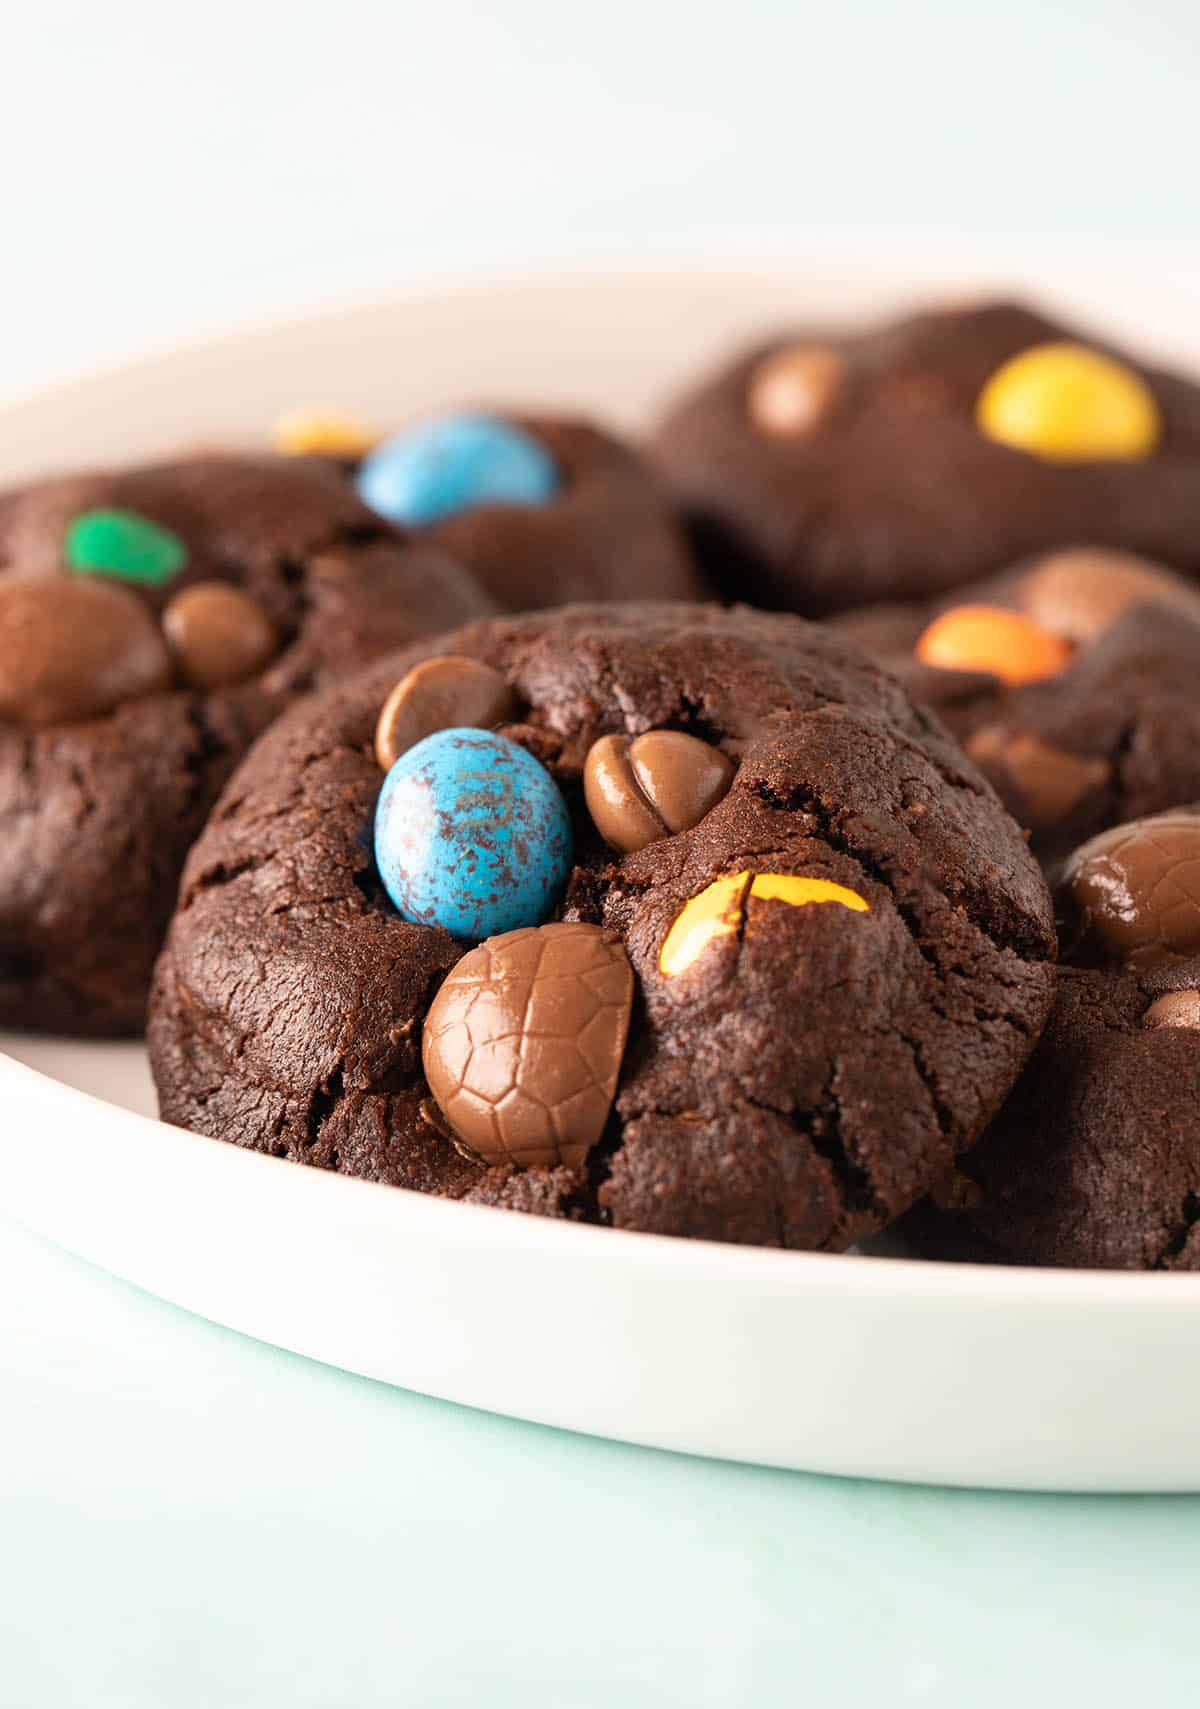 A plate of homemade chocolate Easter Egg Cookies.